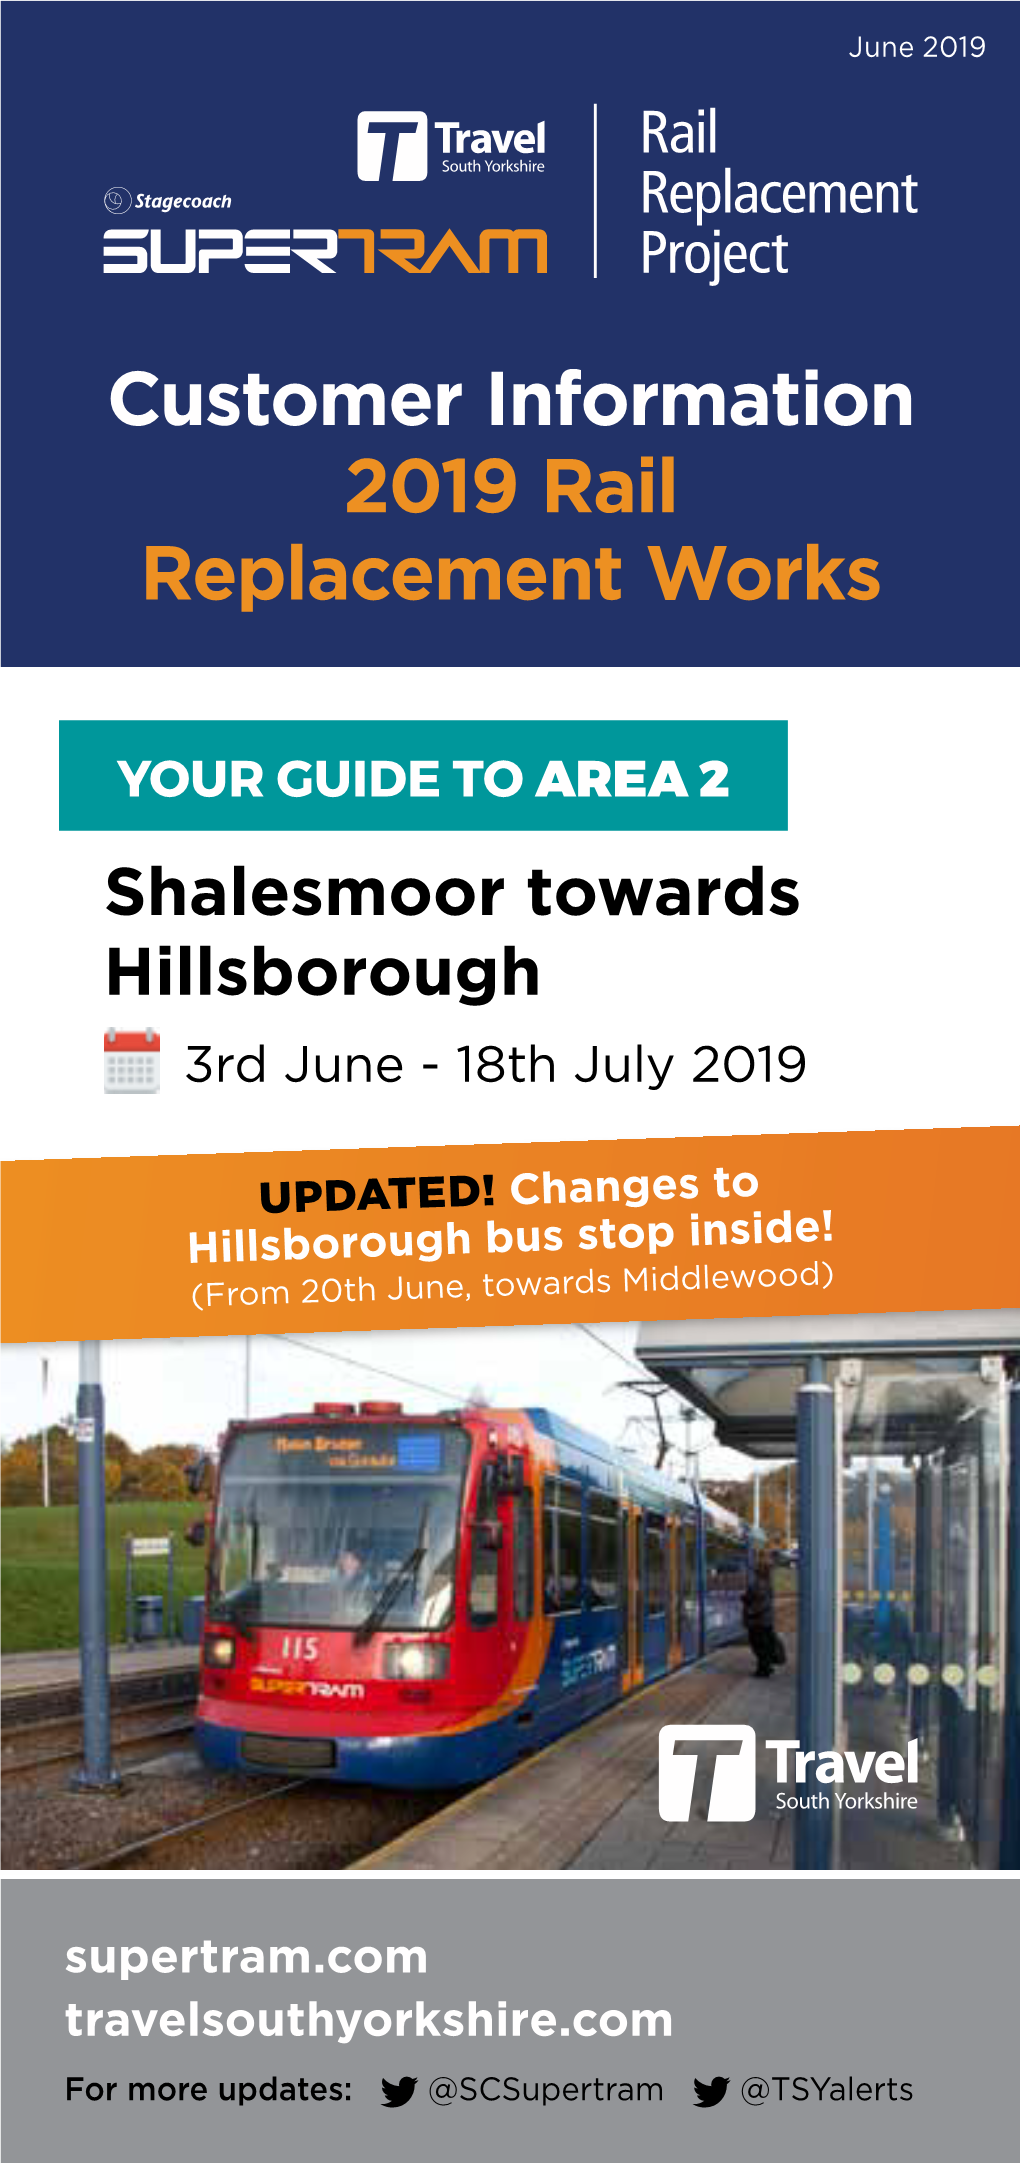 Customer Information 2019 Rail Replacement Works